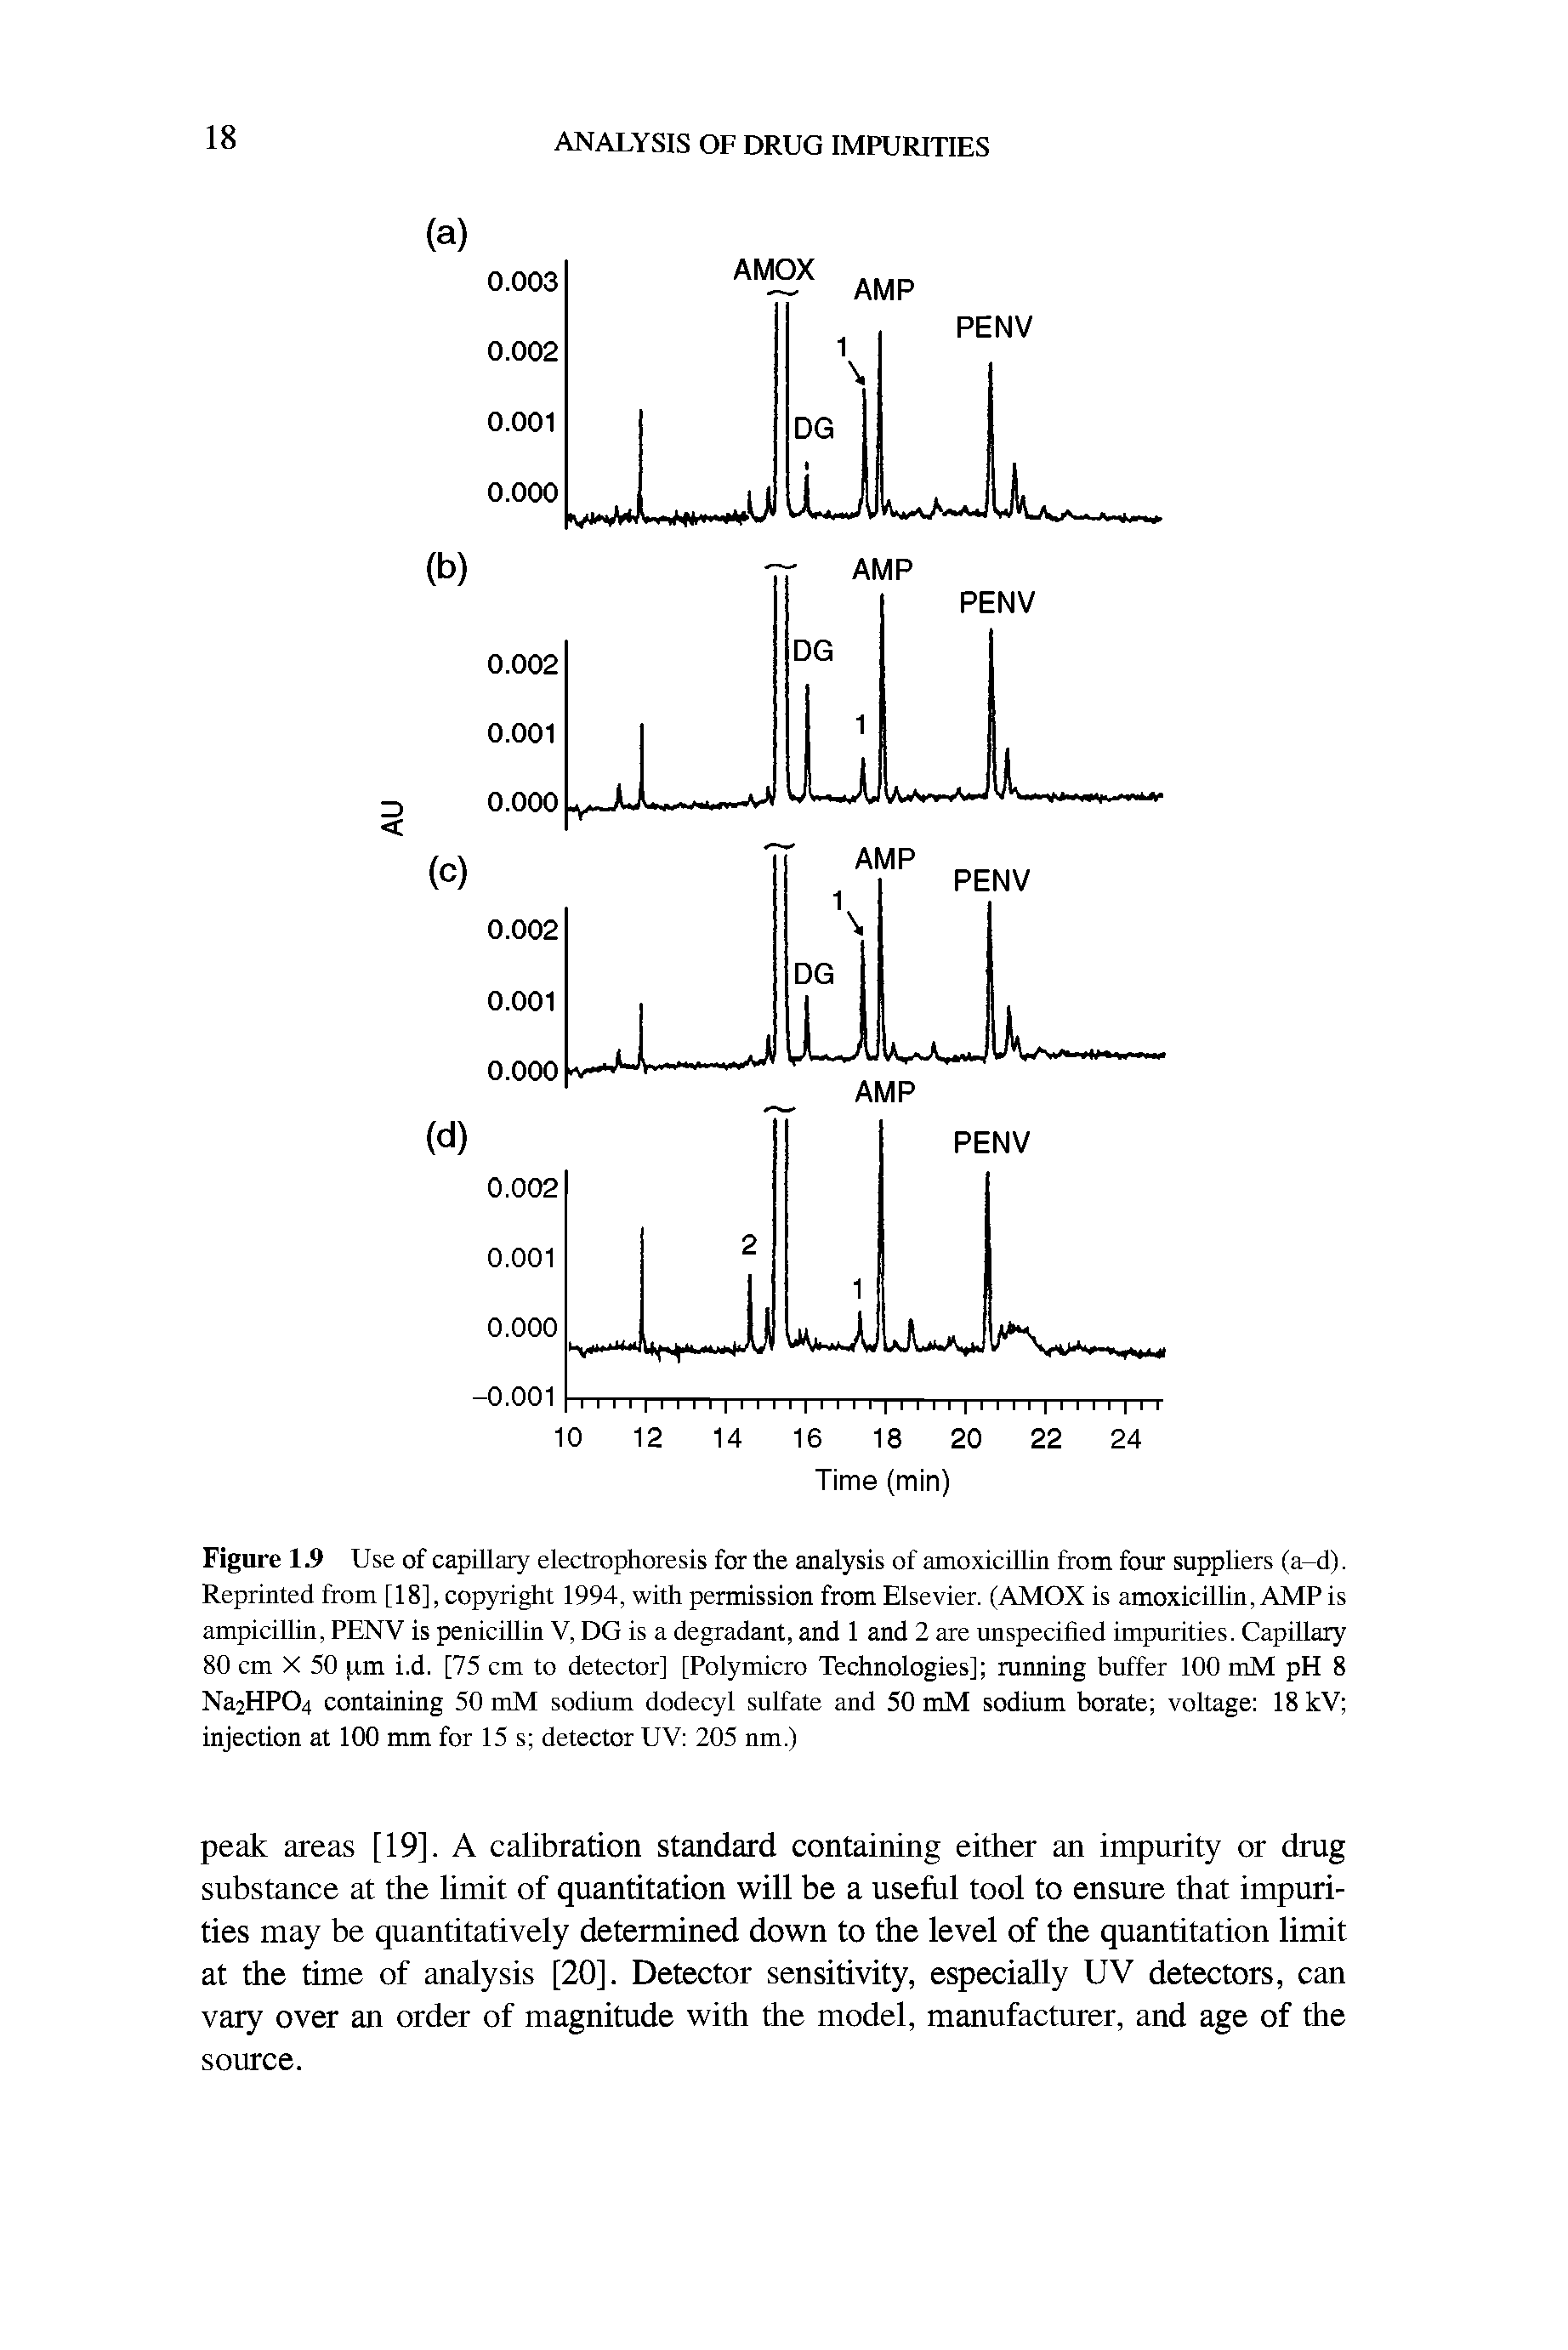 Figure 1.9 Use of capillary electrophoresis for the analysis of amoxicillin from four suppliers (a-d). Reprinted from [18], copyright 1994, with permission from Elsevier. (AMOX is amoxicillin, AMP is ampicillin, PENV is penicillin V, DG is a degradant, and 1 and 2 are unspecified impurities. Capillary 80 cm X 50 (tm i.d. [75 cm to detector] [Polymicro Technologies] running buffer 100 mM pH 8 Na2HP04 containing 50 mM sodium dodecyl sulfate and 50 mM sodium borate voltage 18 kV injection at 100 mm for 15 s detector UV 205 nm.)...